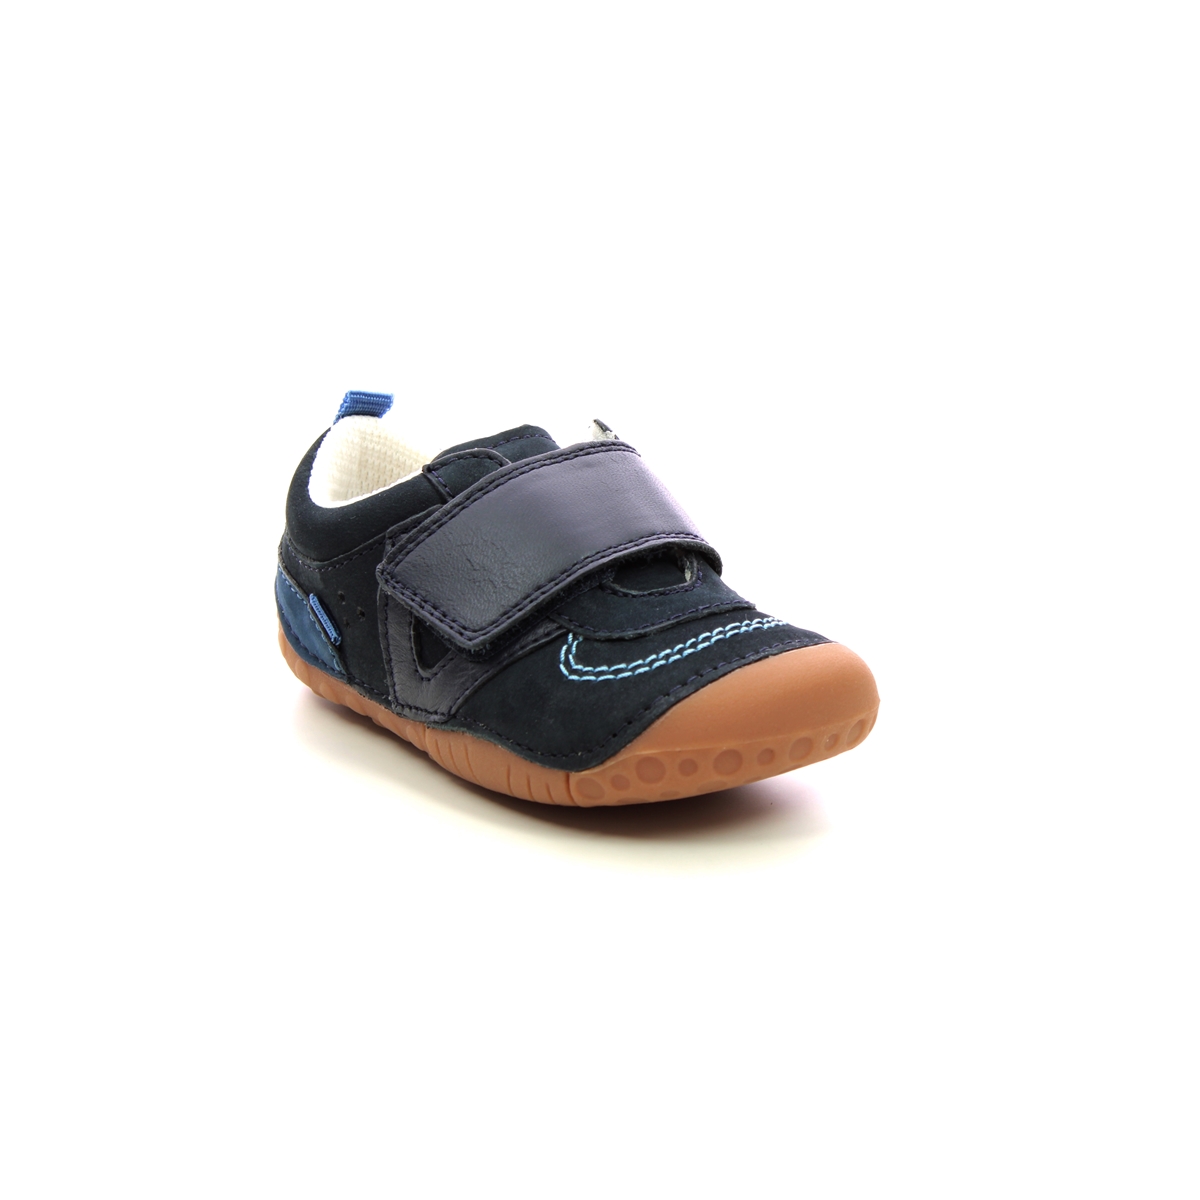 Start Rite - Shuffle 1V In Navy Leather 0786-96F In Size 4.5 In Plain Navy Leather Boys First And Toddler Shoes  In Navy Leather